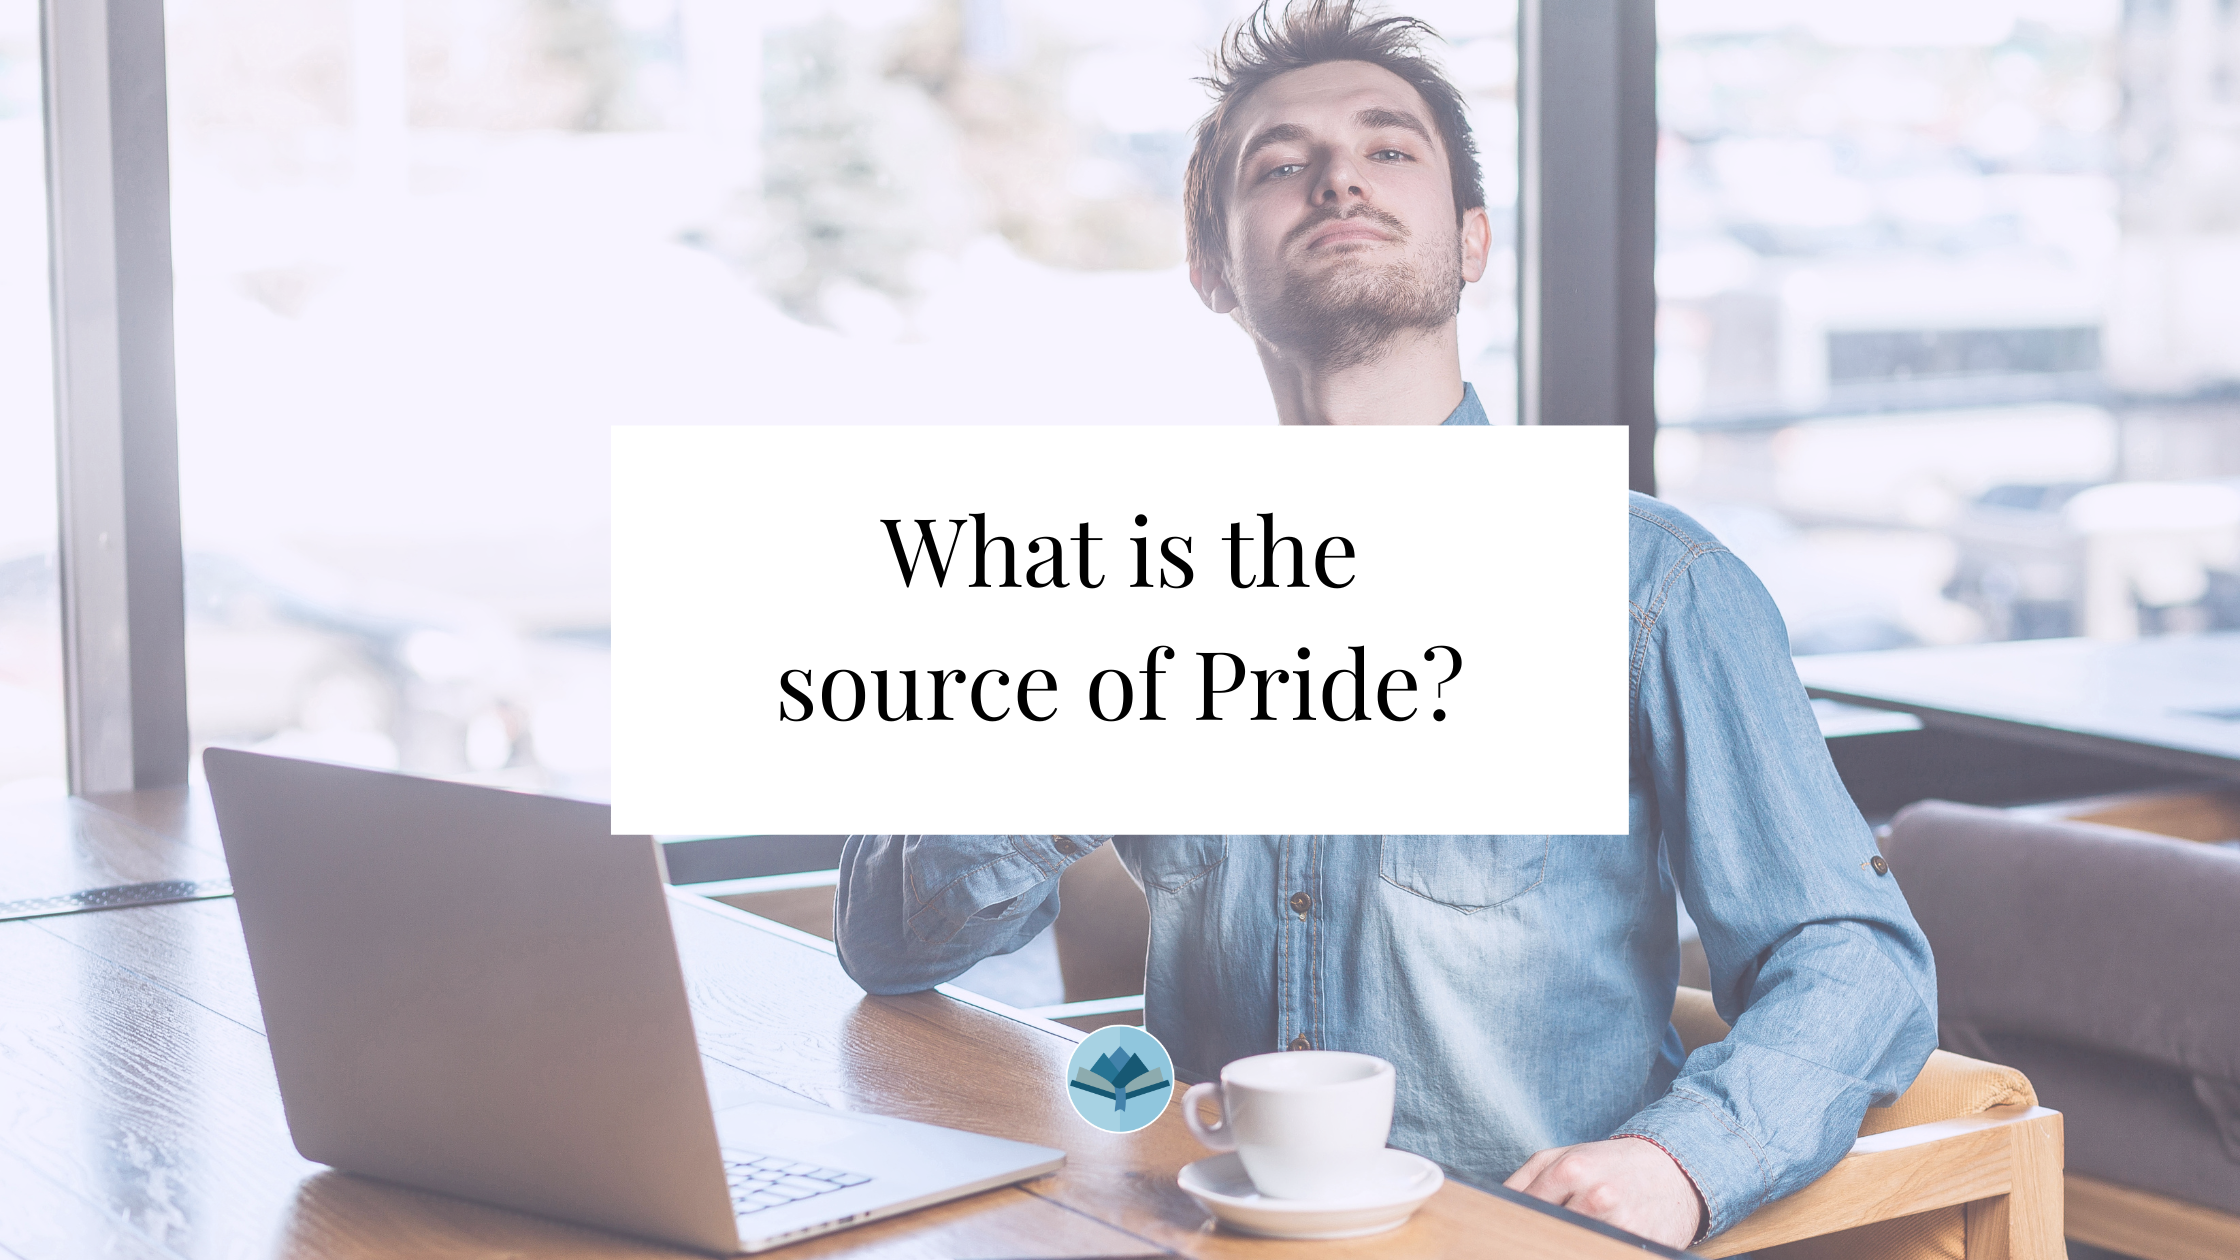 What is the source of pride